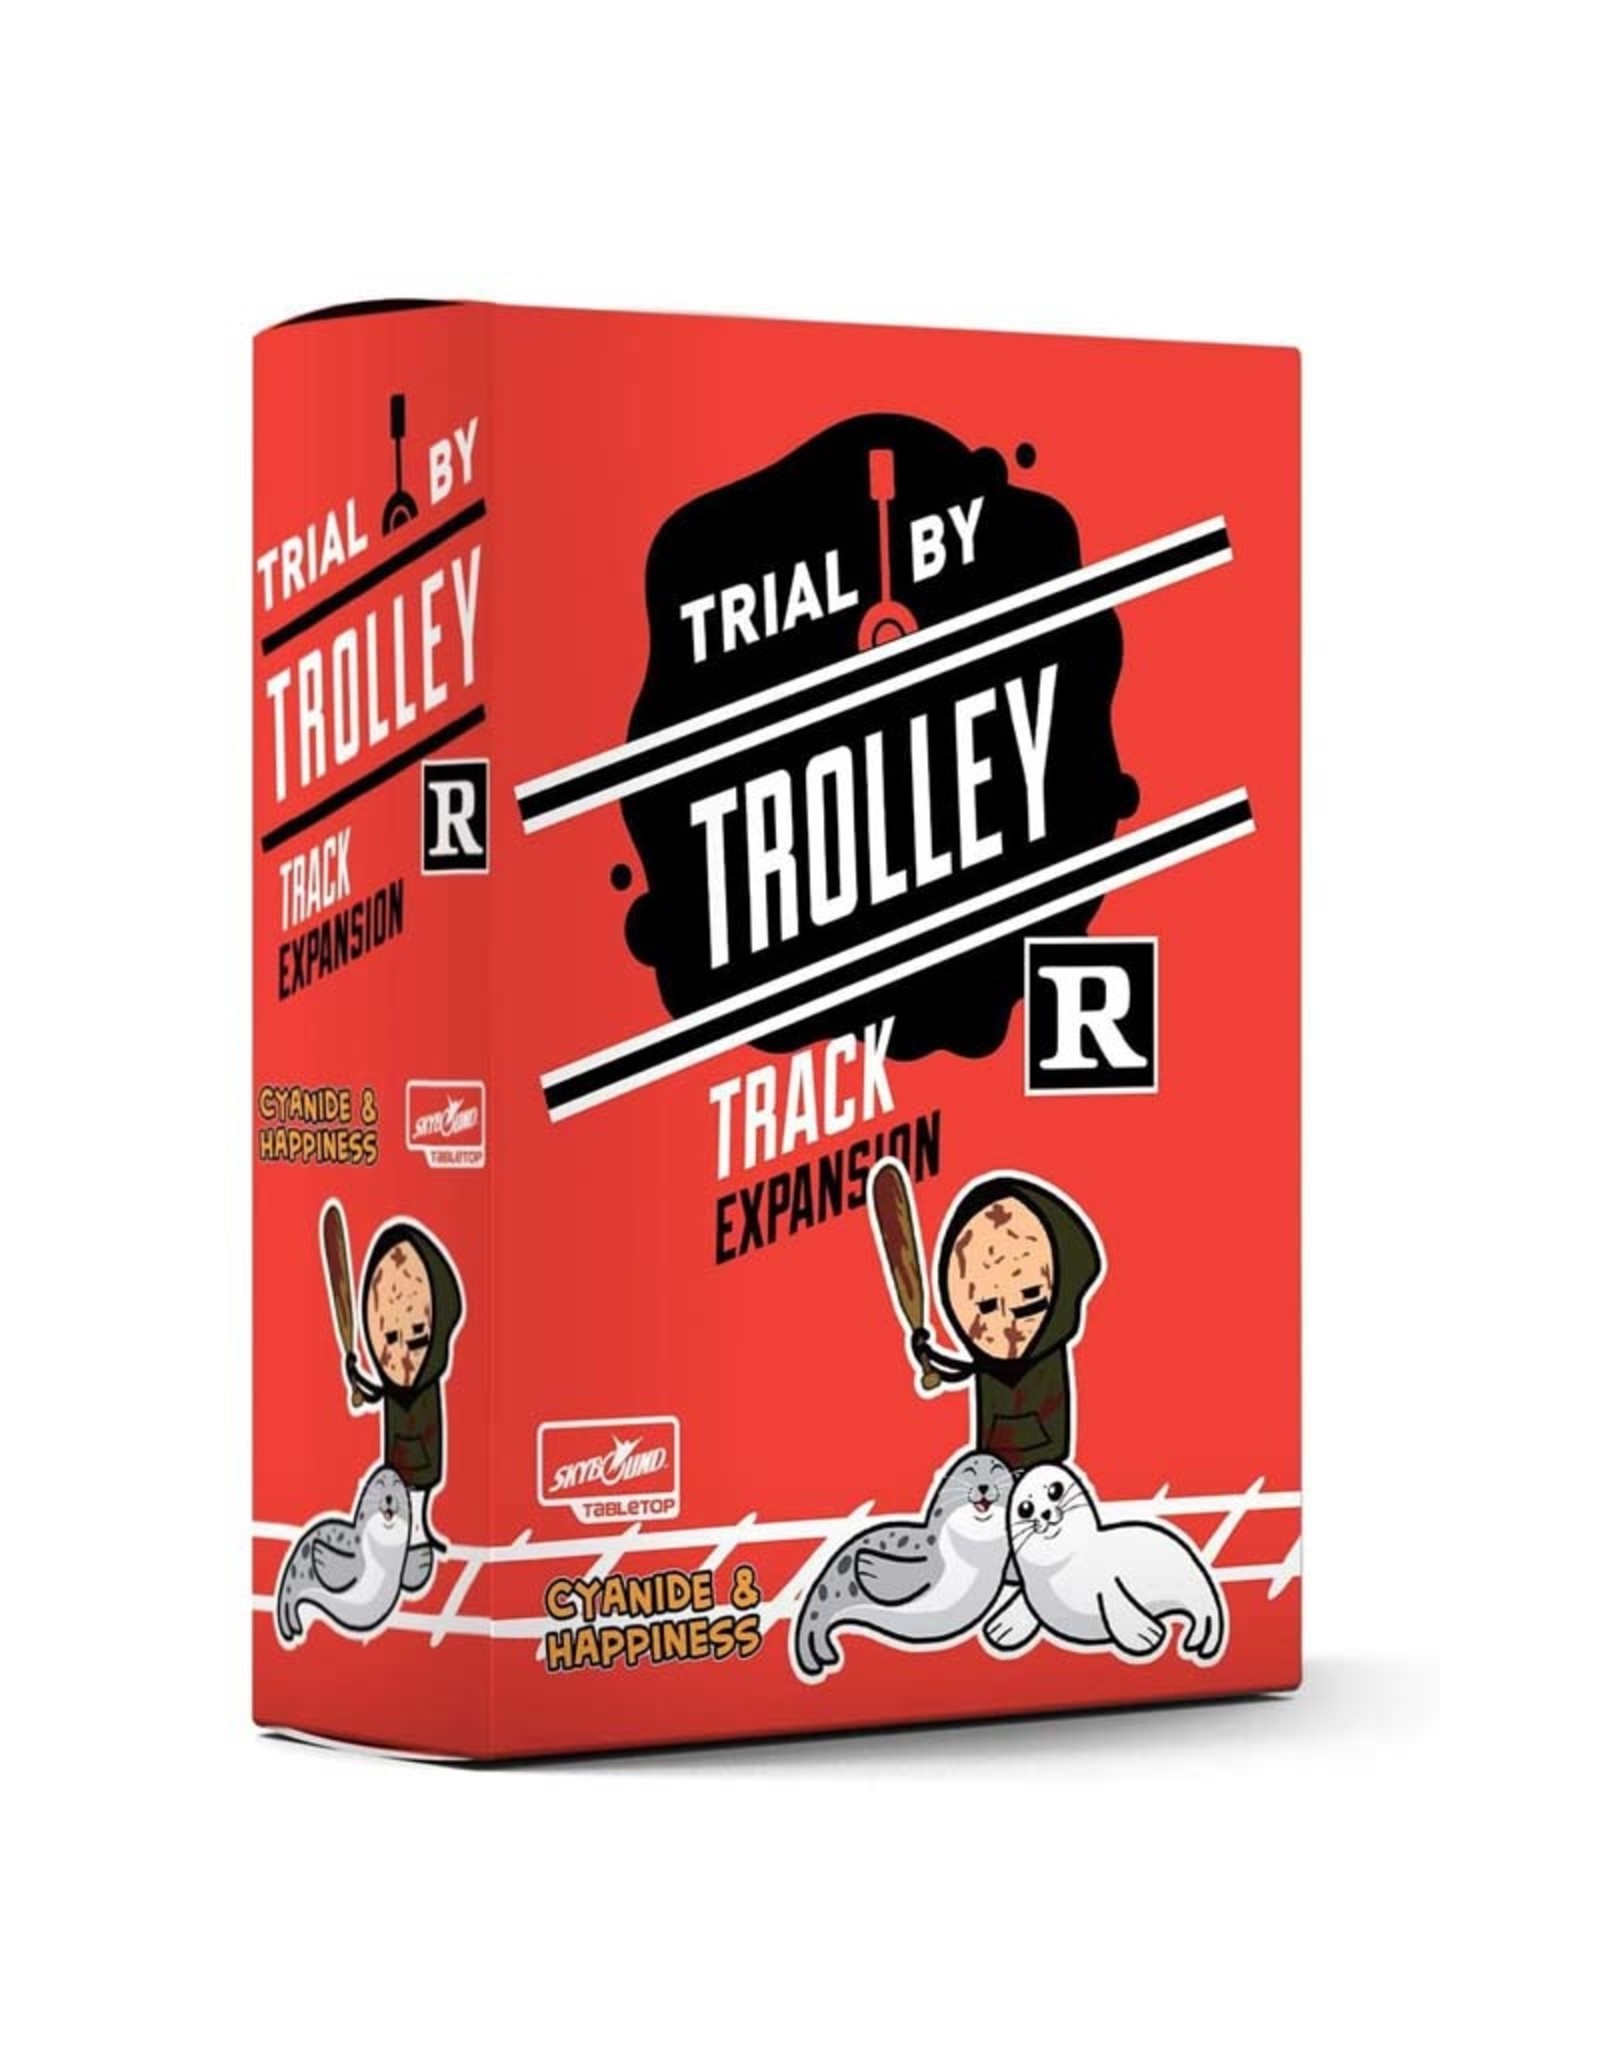 Skybound Trial by Trolley: Track NSFW Expansion